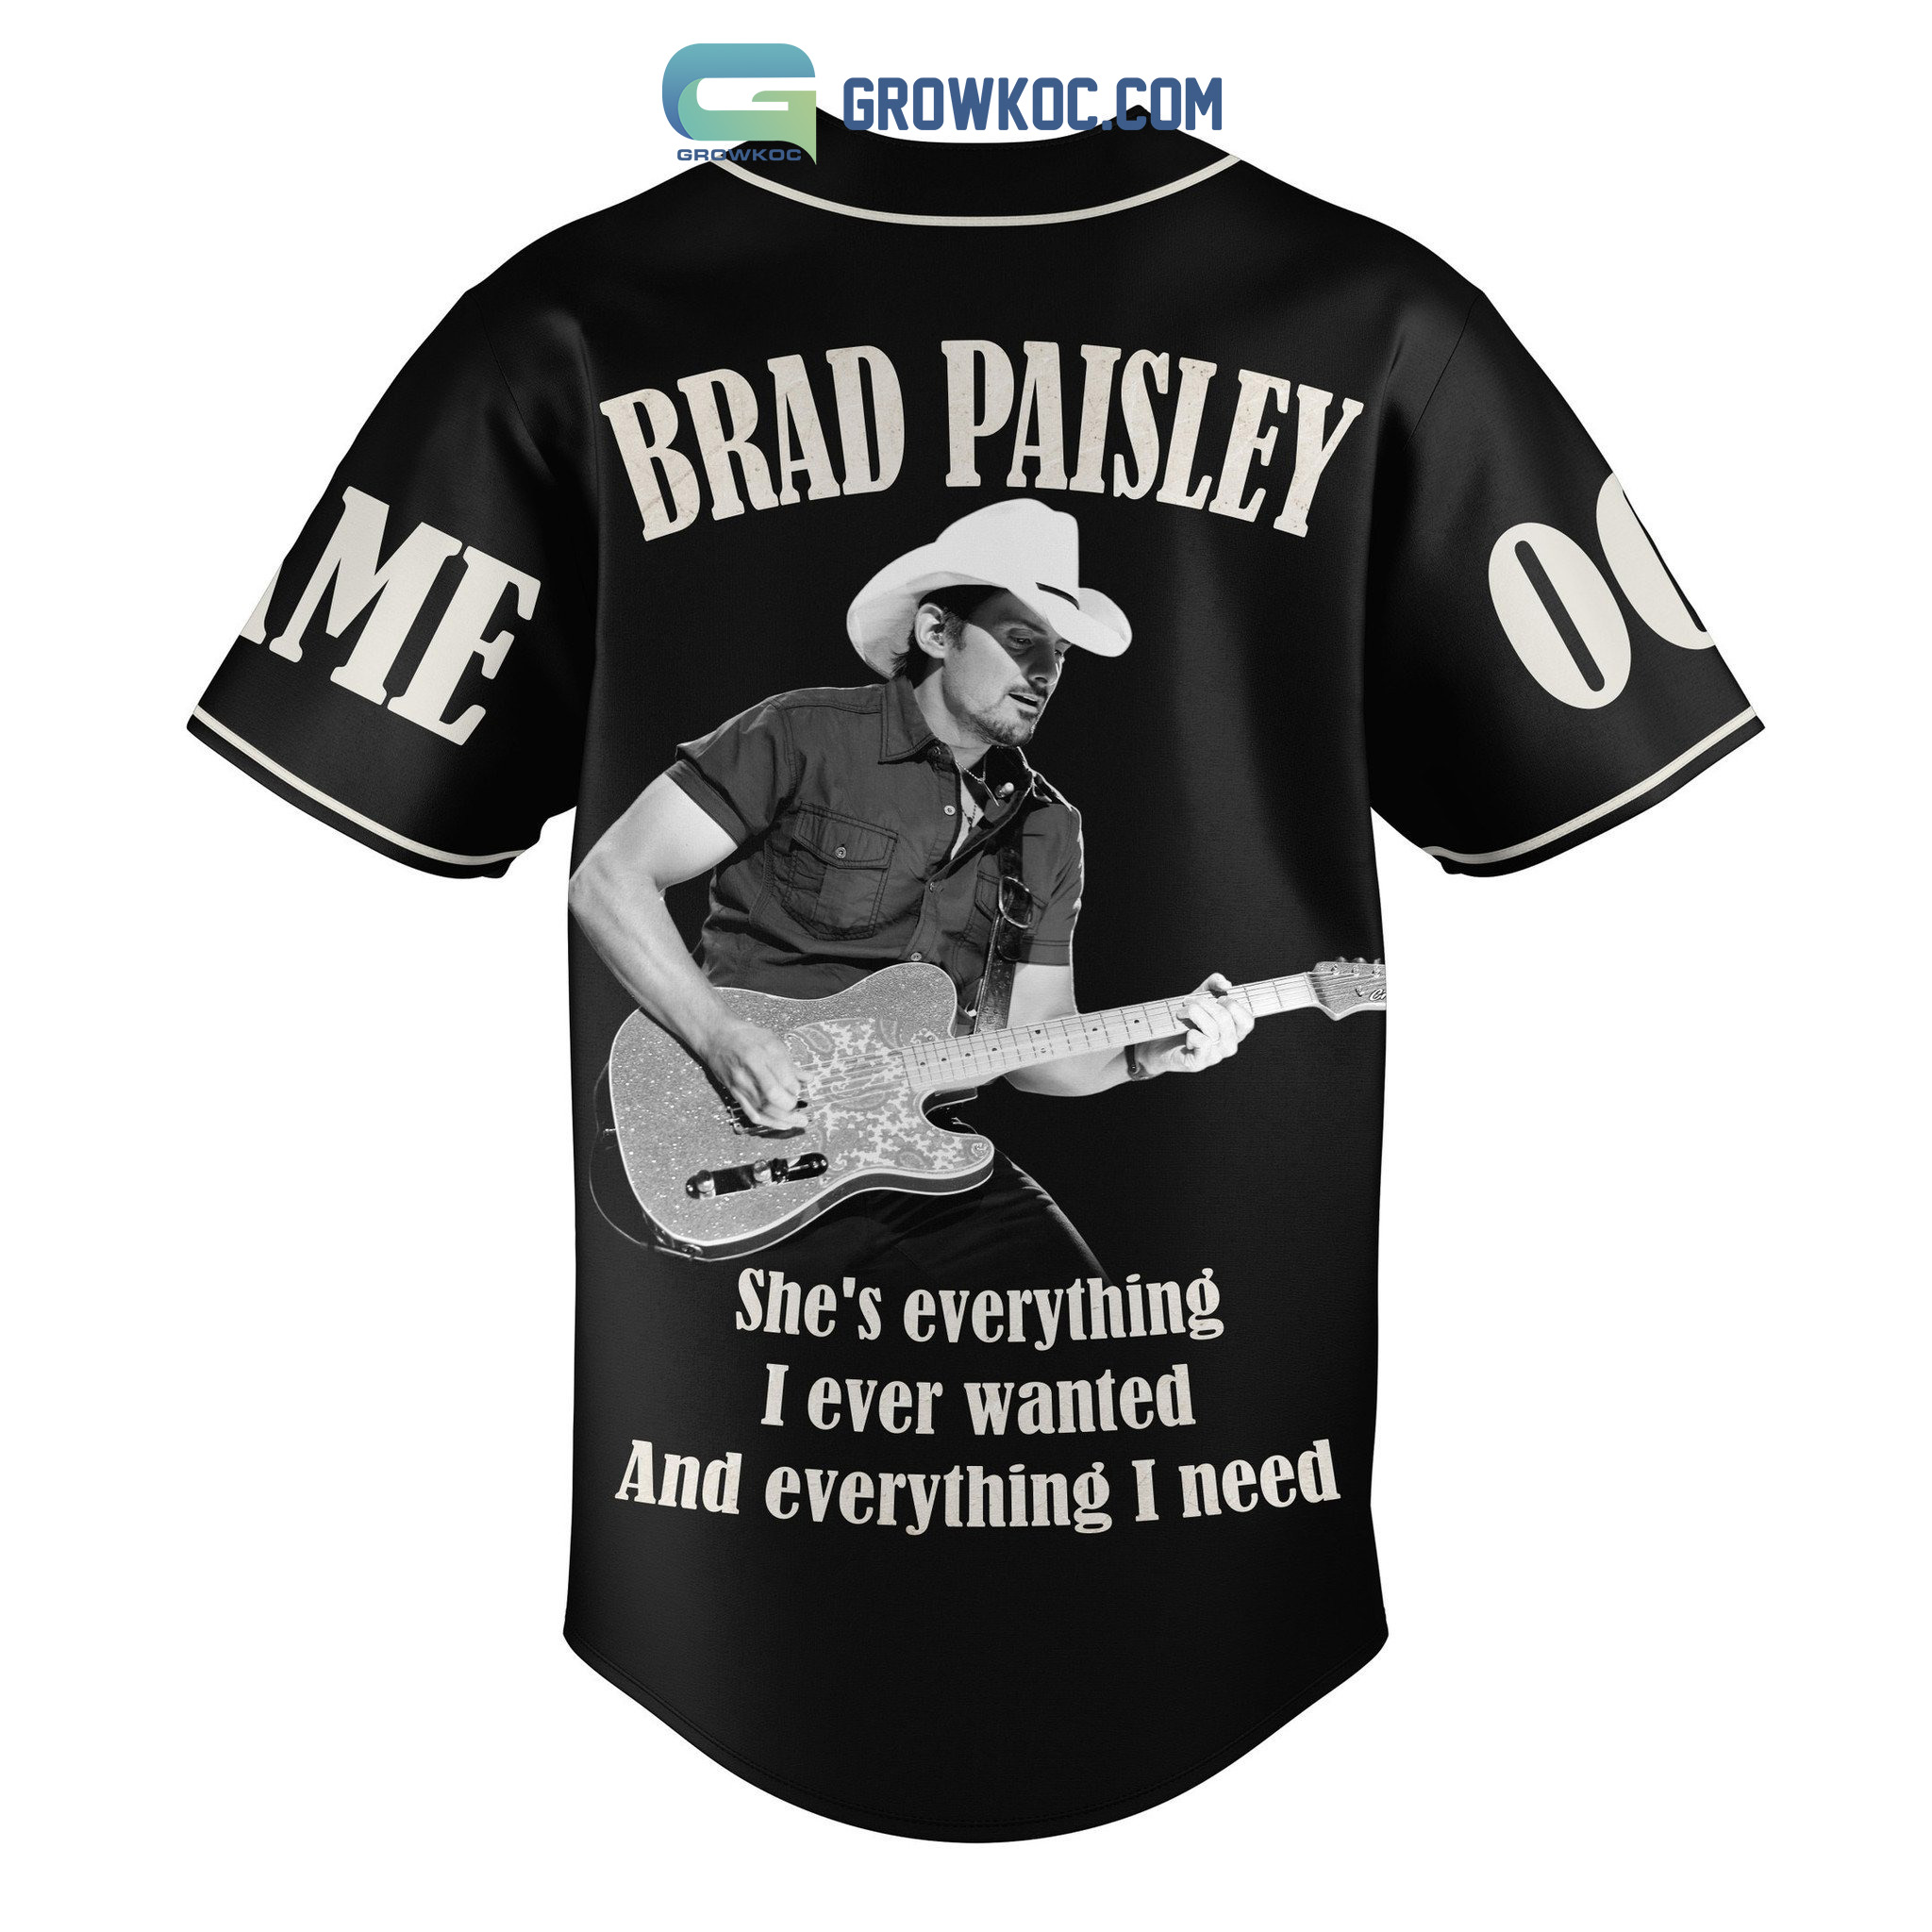 Brad Paisley has helped others since he was a boy